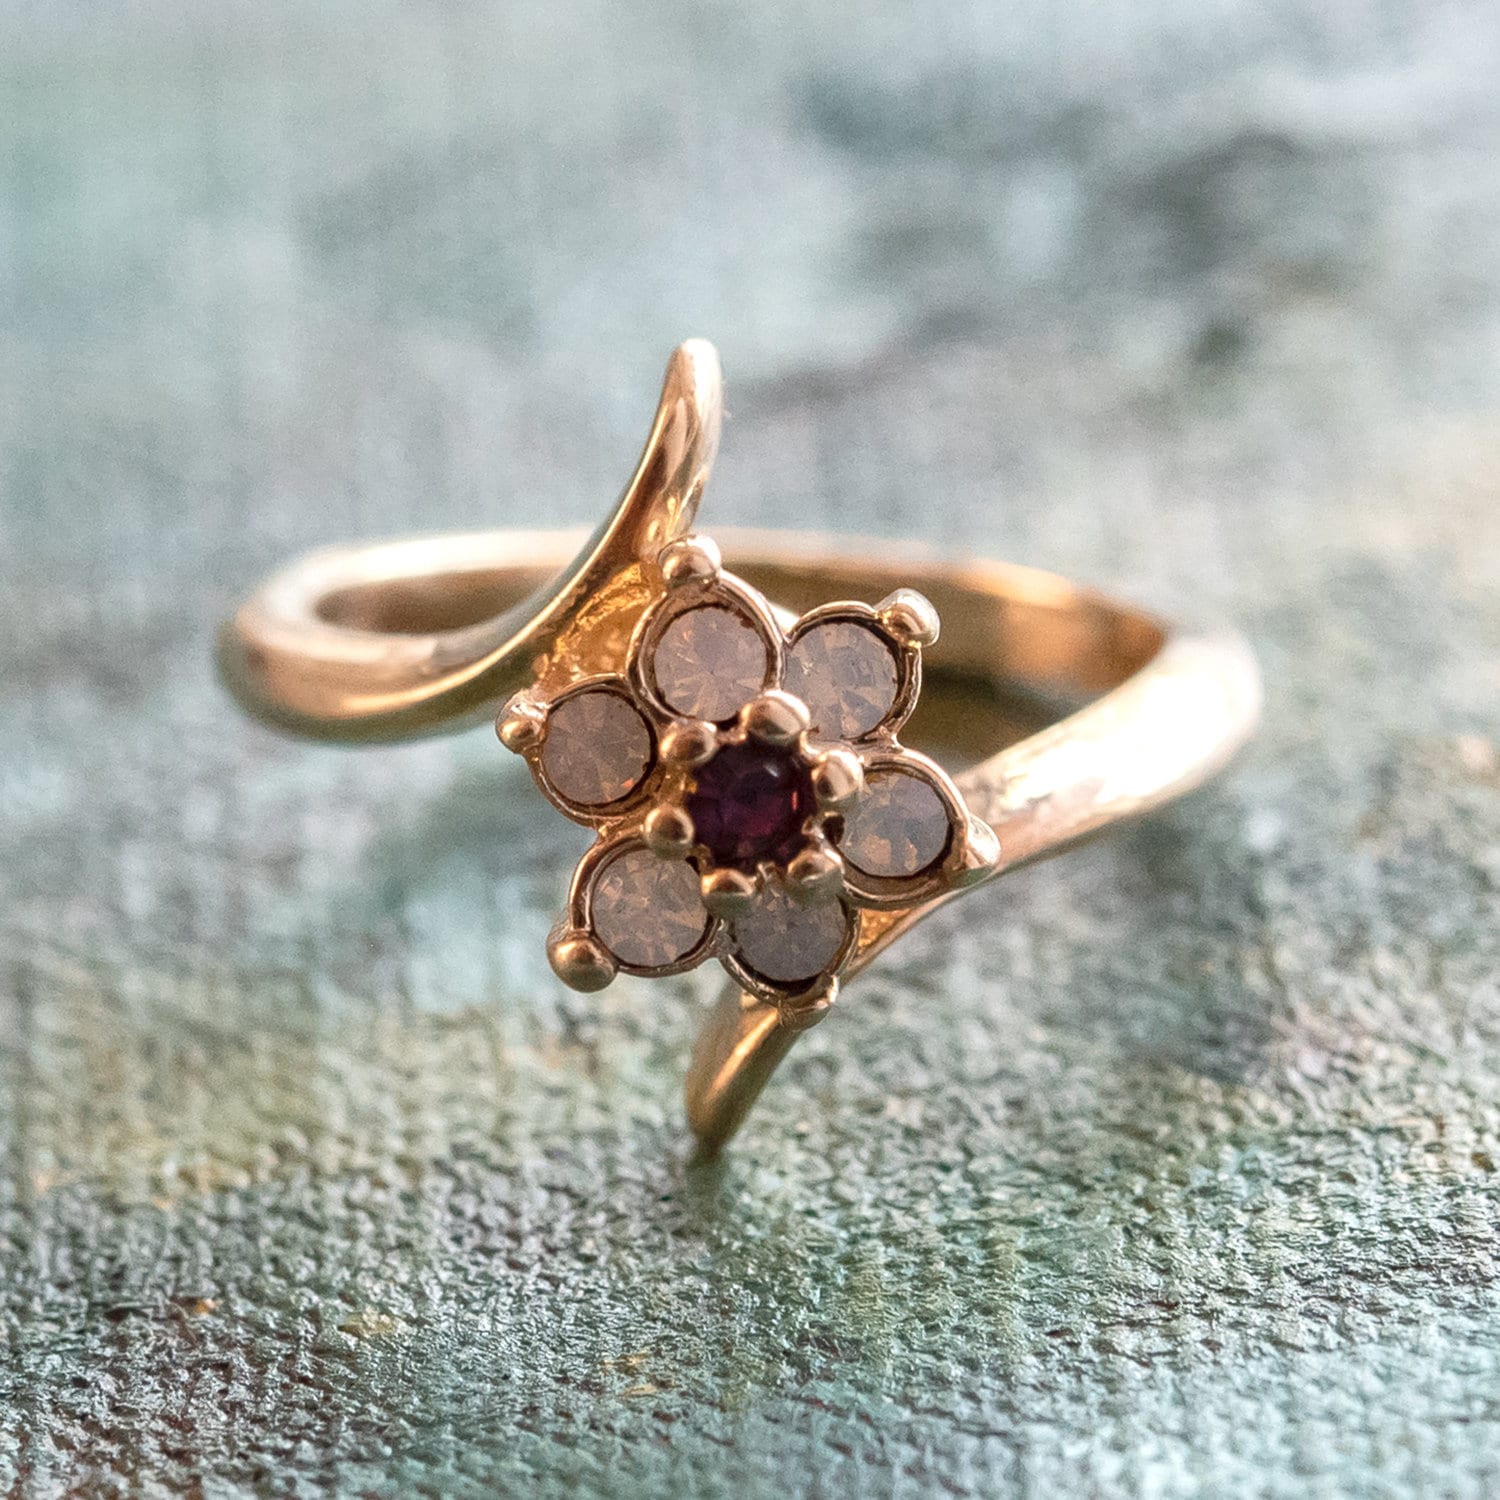 Vintage Ring 1970's Amethyst Crystal and Genuine Pinfire Opal Ring 18kt Gold Ring Womans Antique Jewlery R842 - Limited Stock - Never Worn